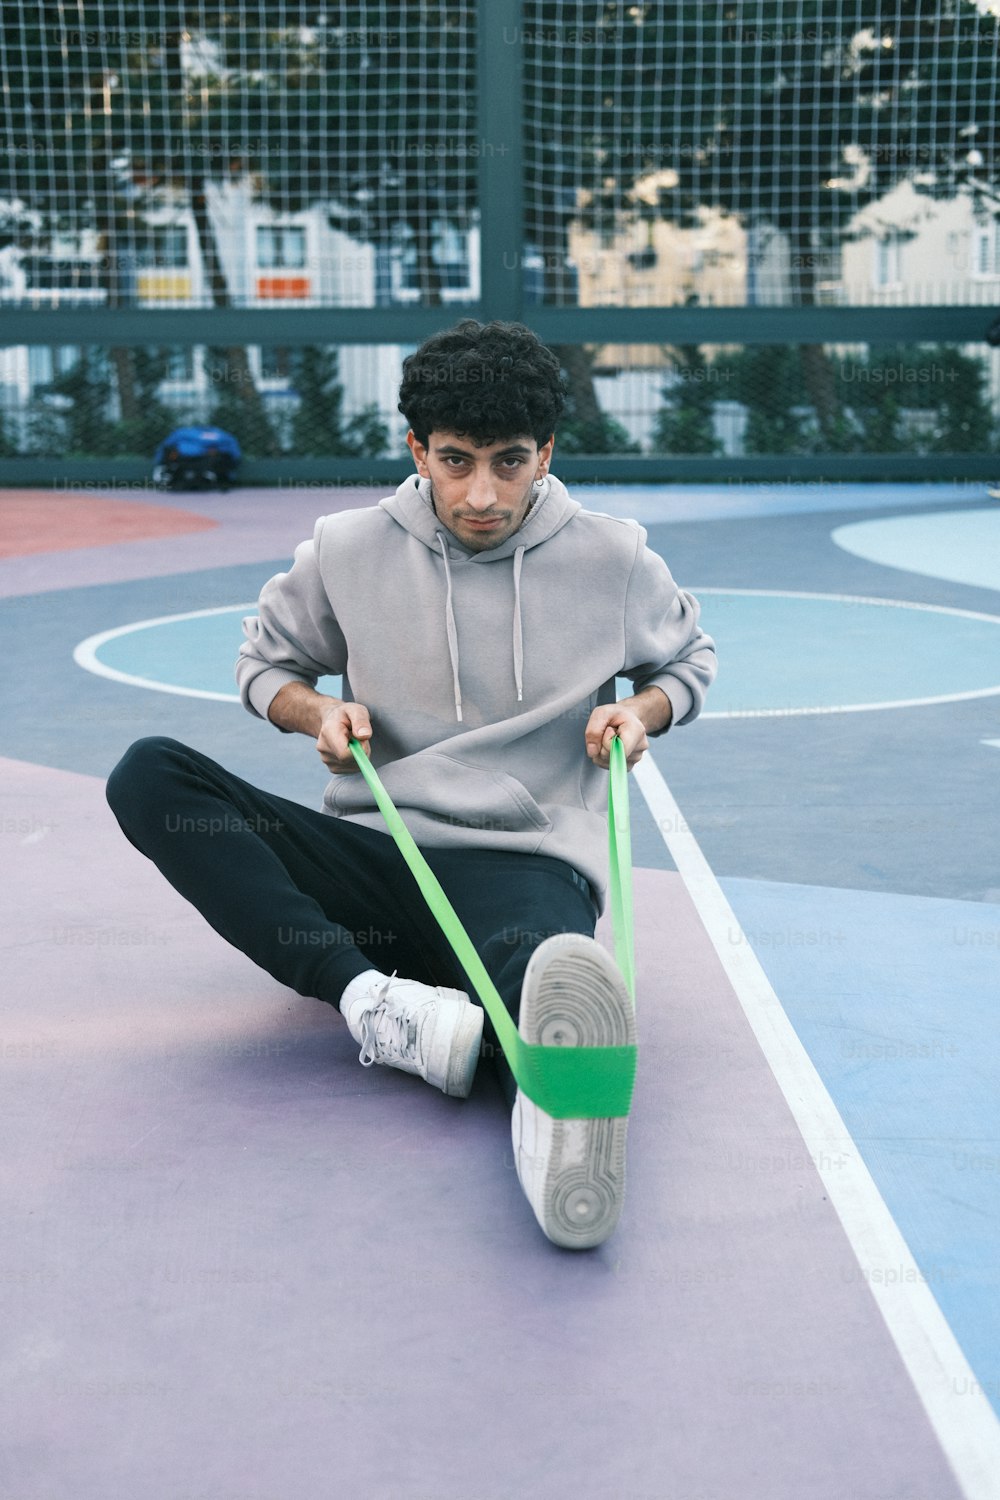 a man sitting on a basketball court holding a green handle